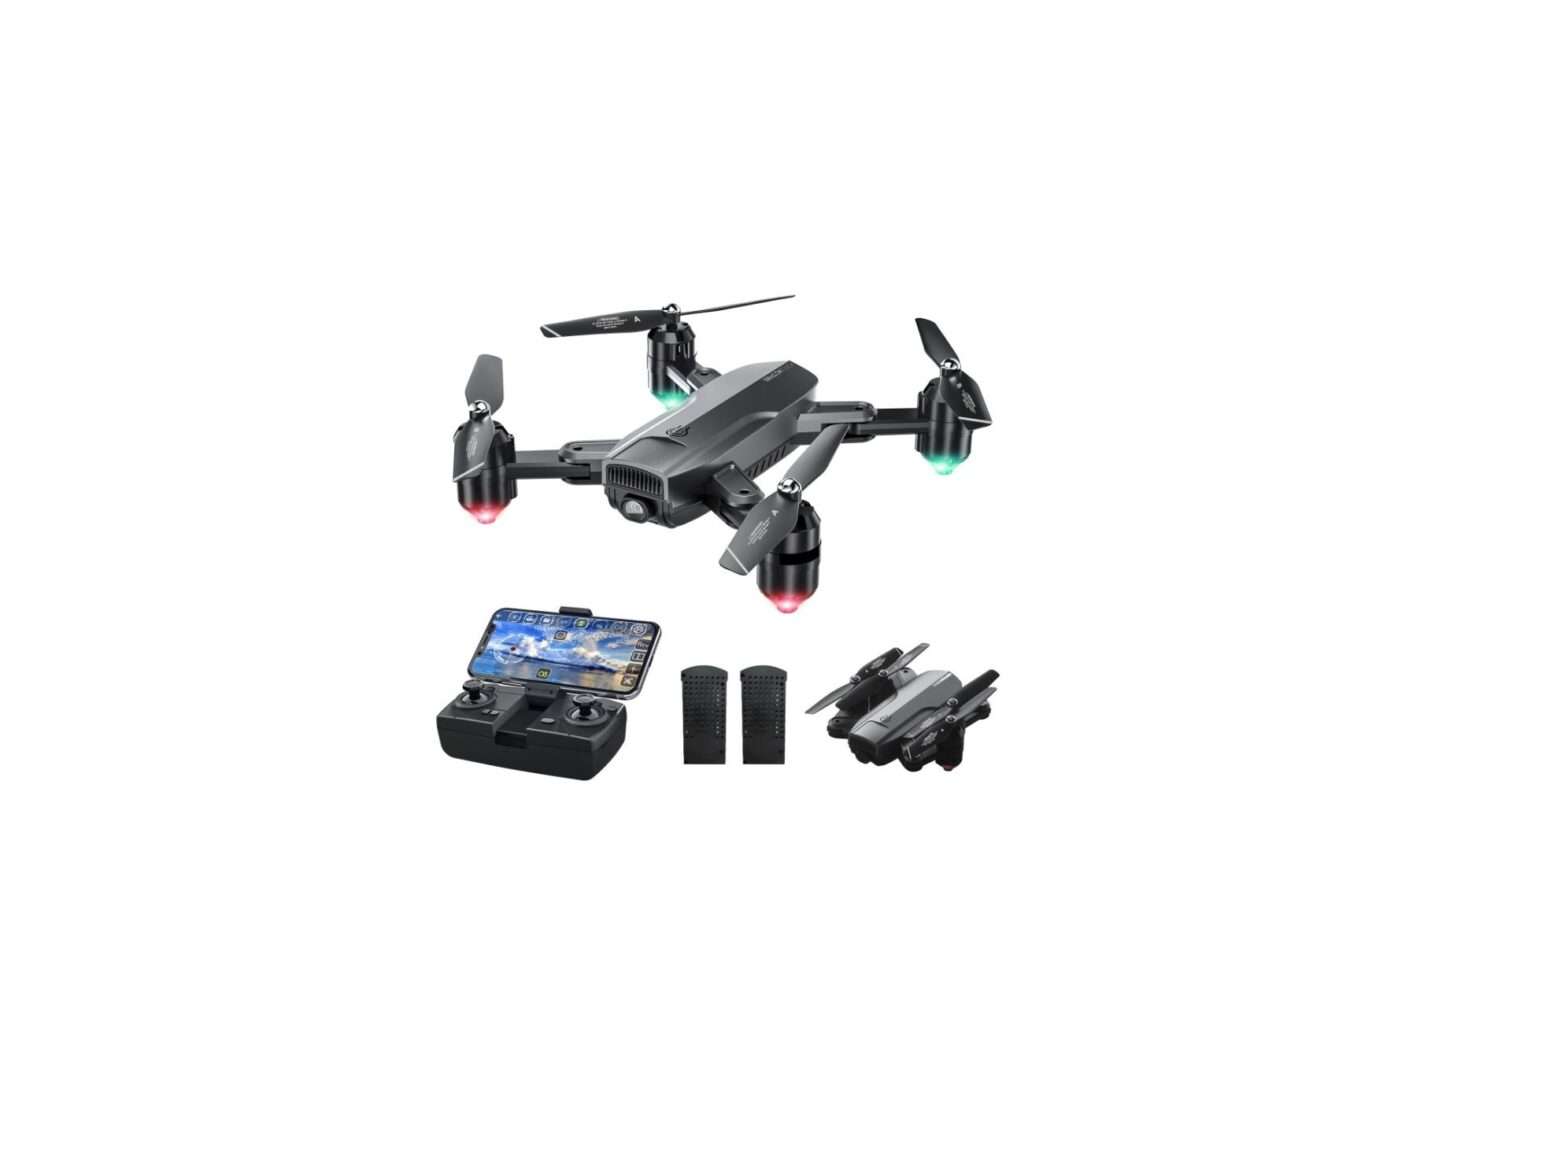 Dragon Touch DF01 Drone User Manual